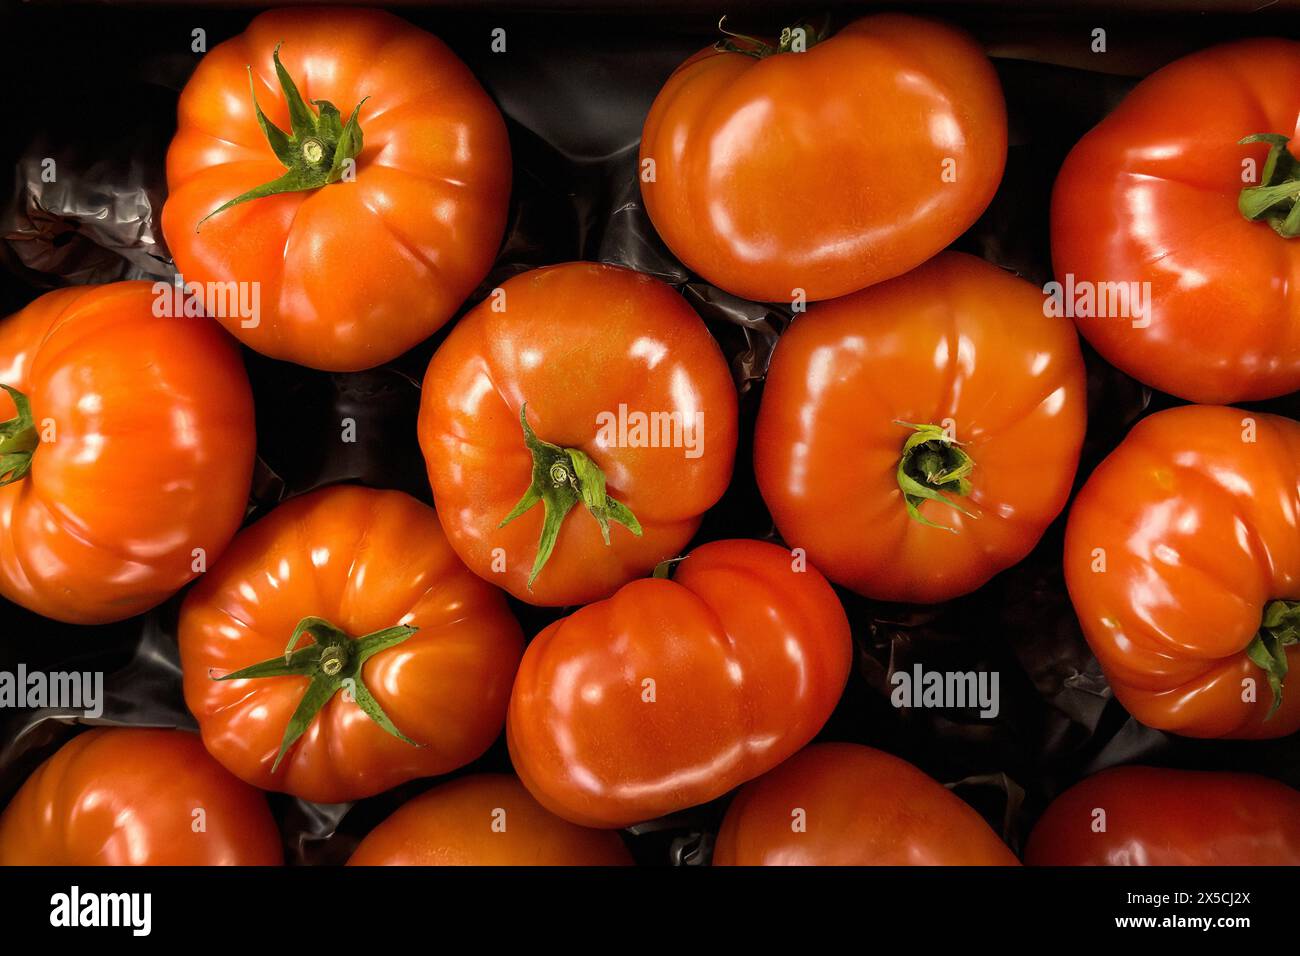 Meat tomatoes unprocessed raw in display of greengrocer greengrocer grocery shop grocery store grocer supermarket, Germany, Europe Stock Photo